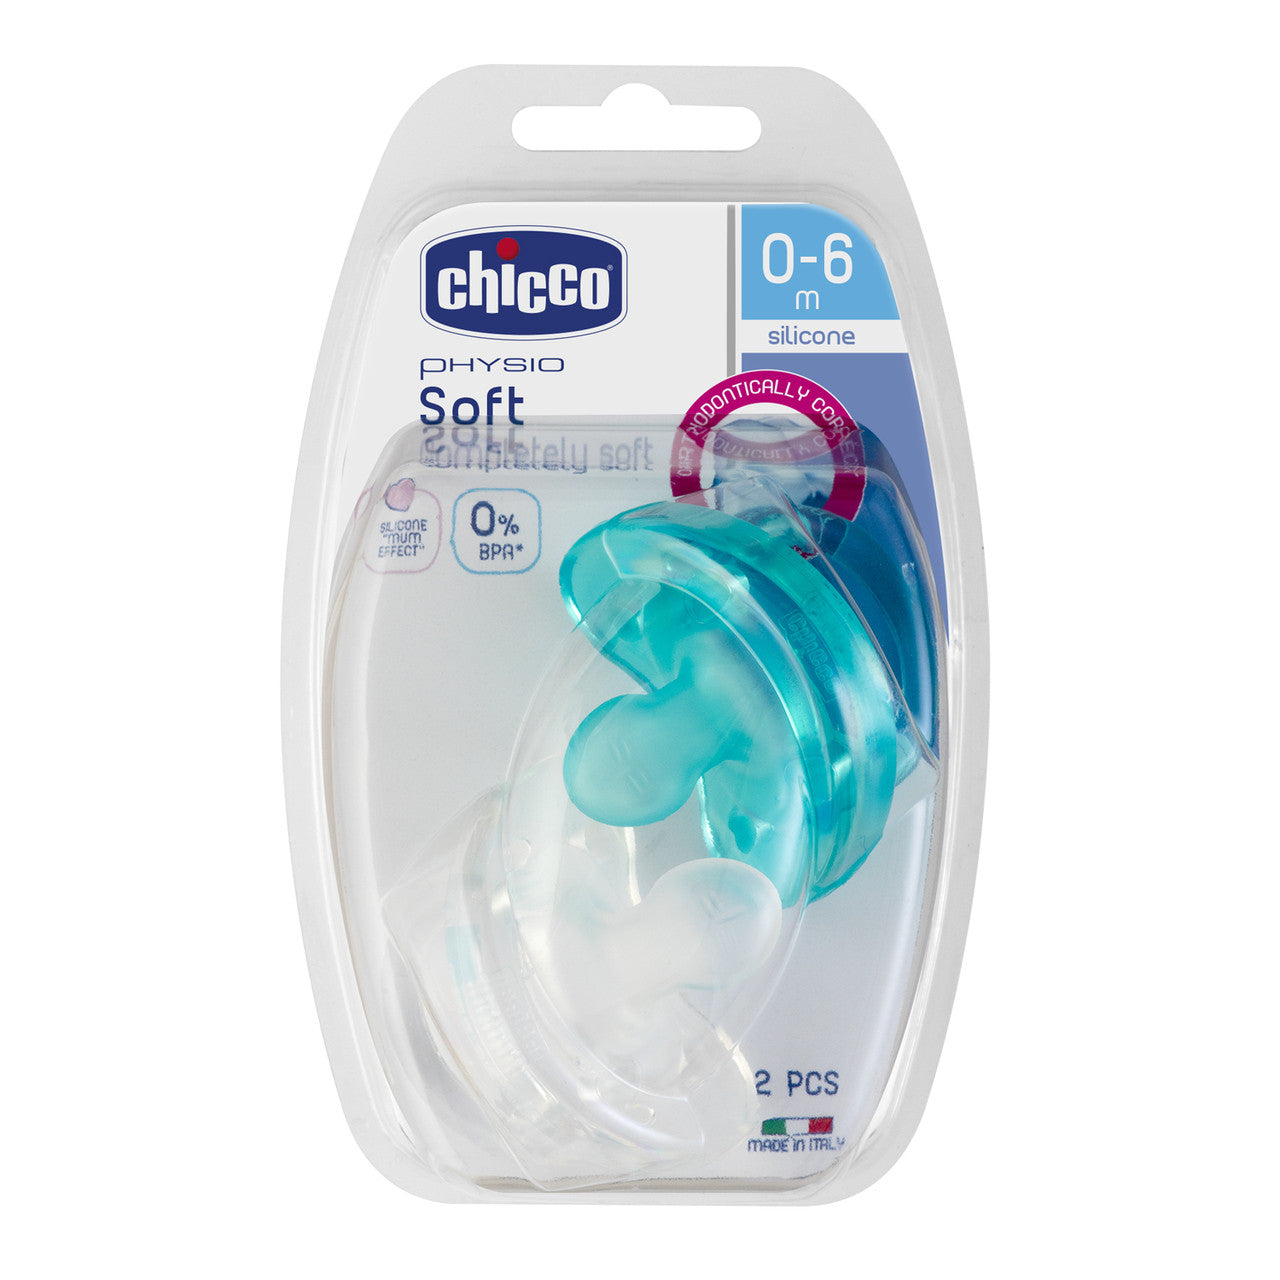 Physio Soft Soother 0-6m | 2 pack in Green & Clear available at Bear & Moo